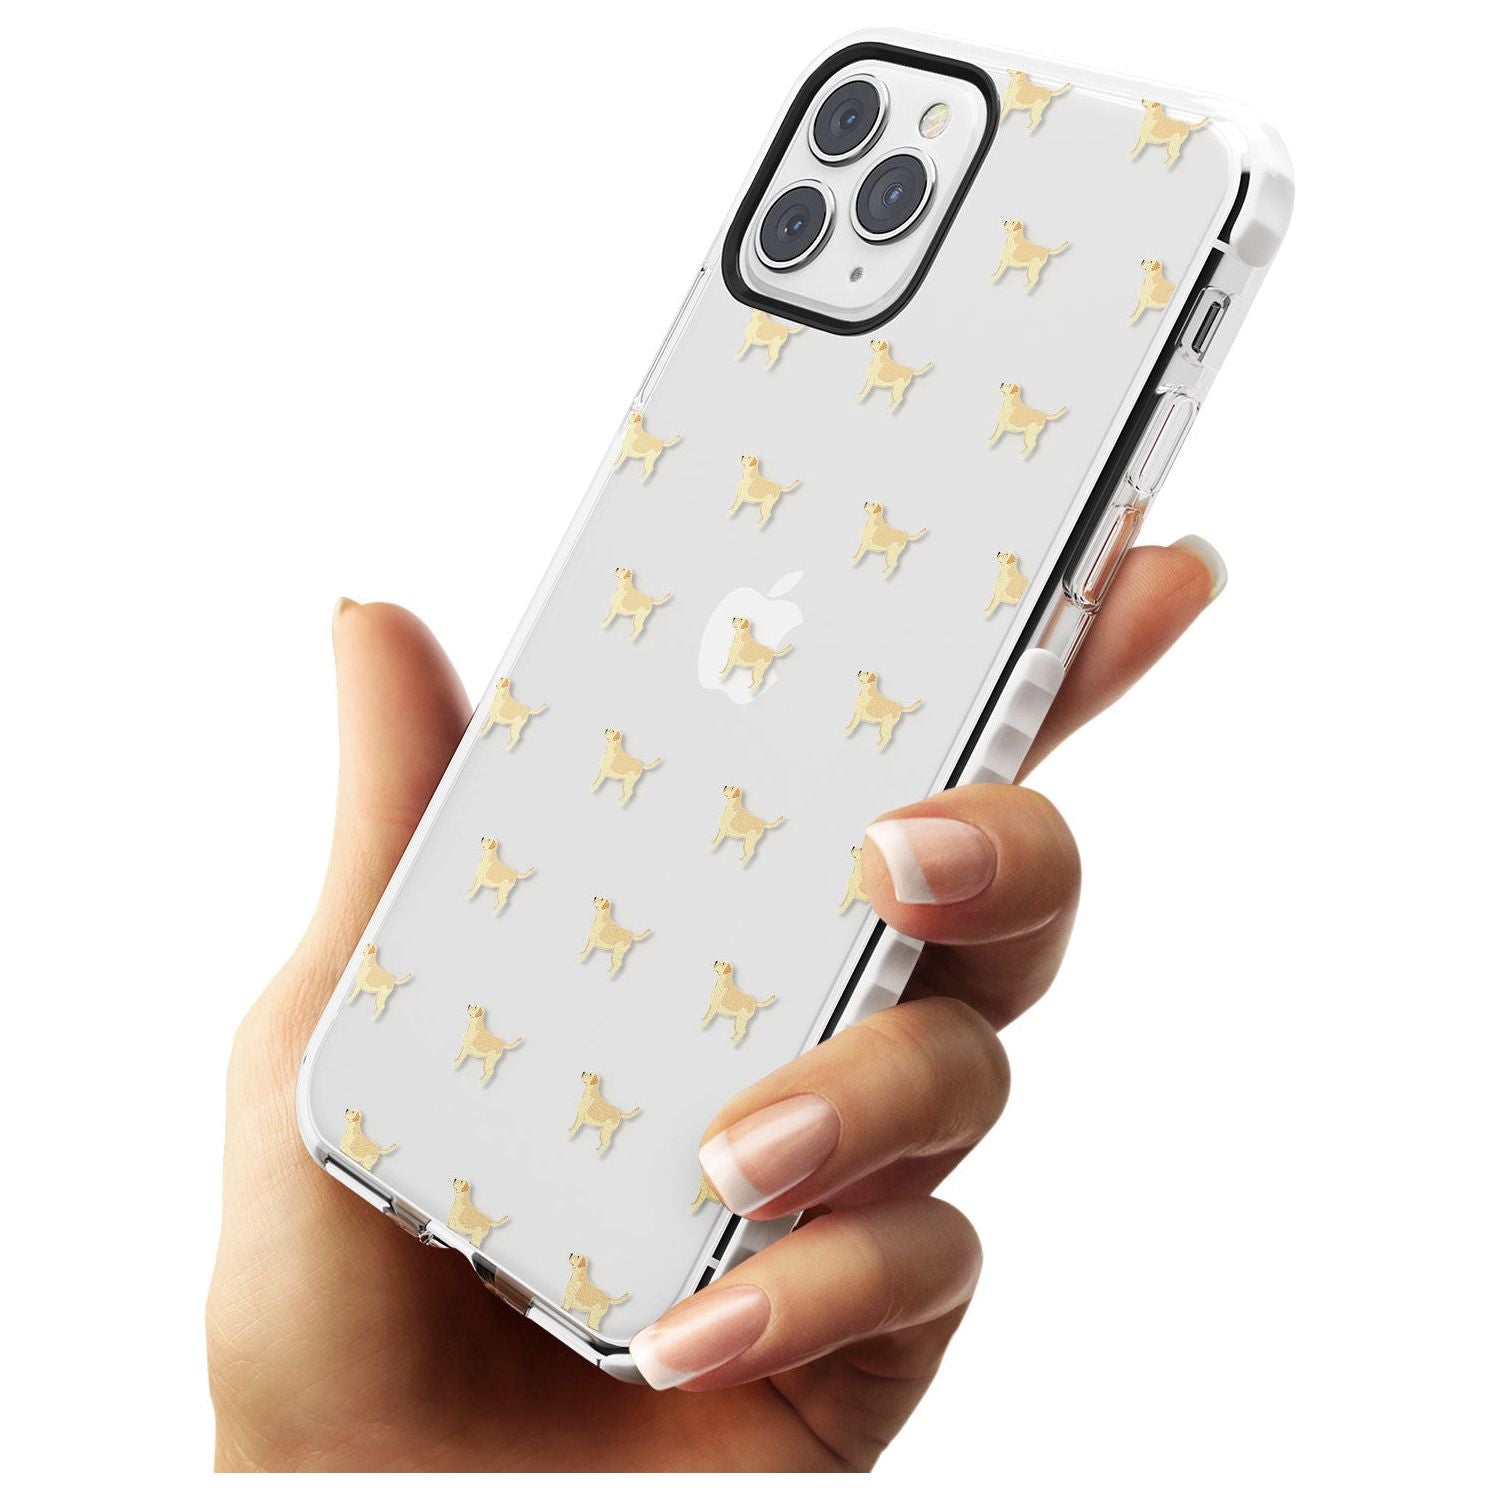 Tan Labrador Dog Pattern Clear Impact Phone Case for iPhone 11 Pro Max